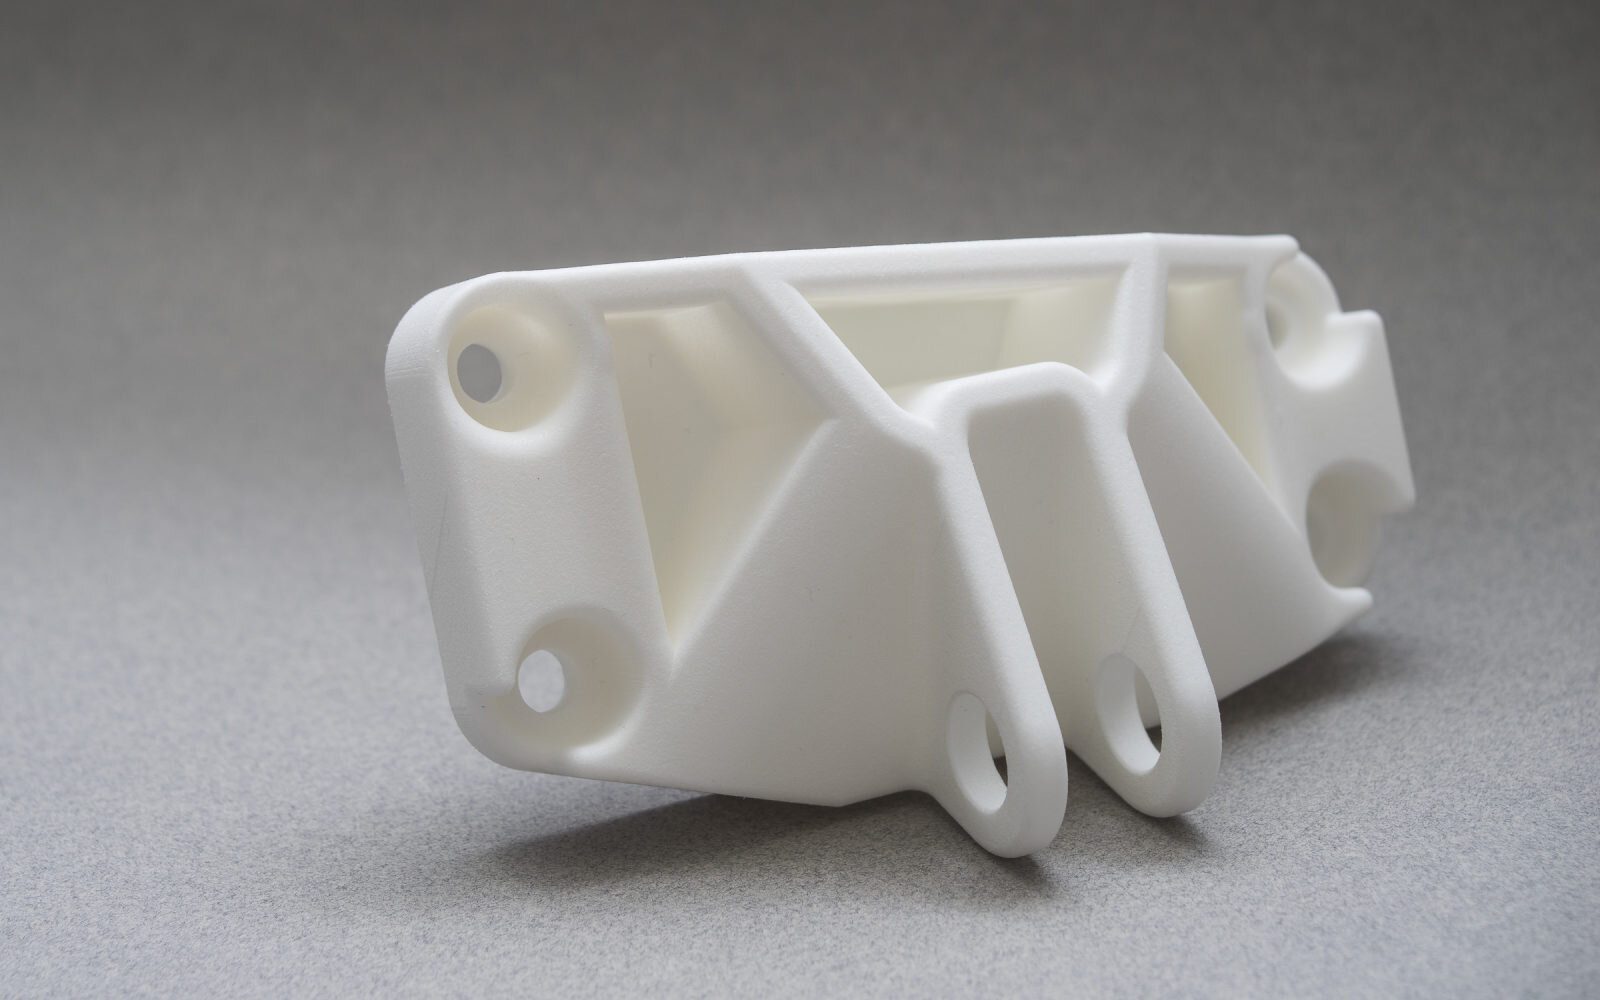 What are the Downsides of SLA 3D Printing?